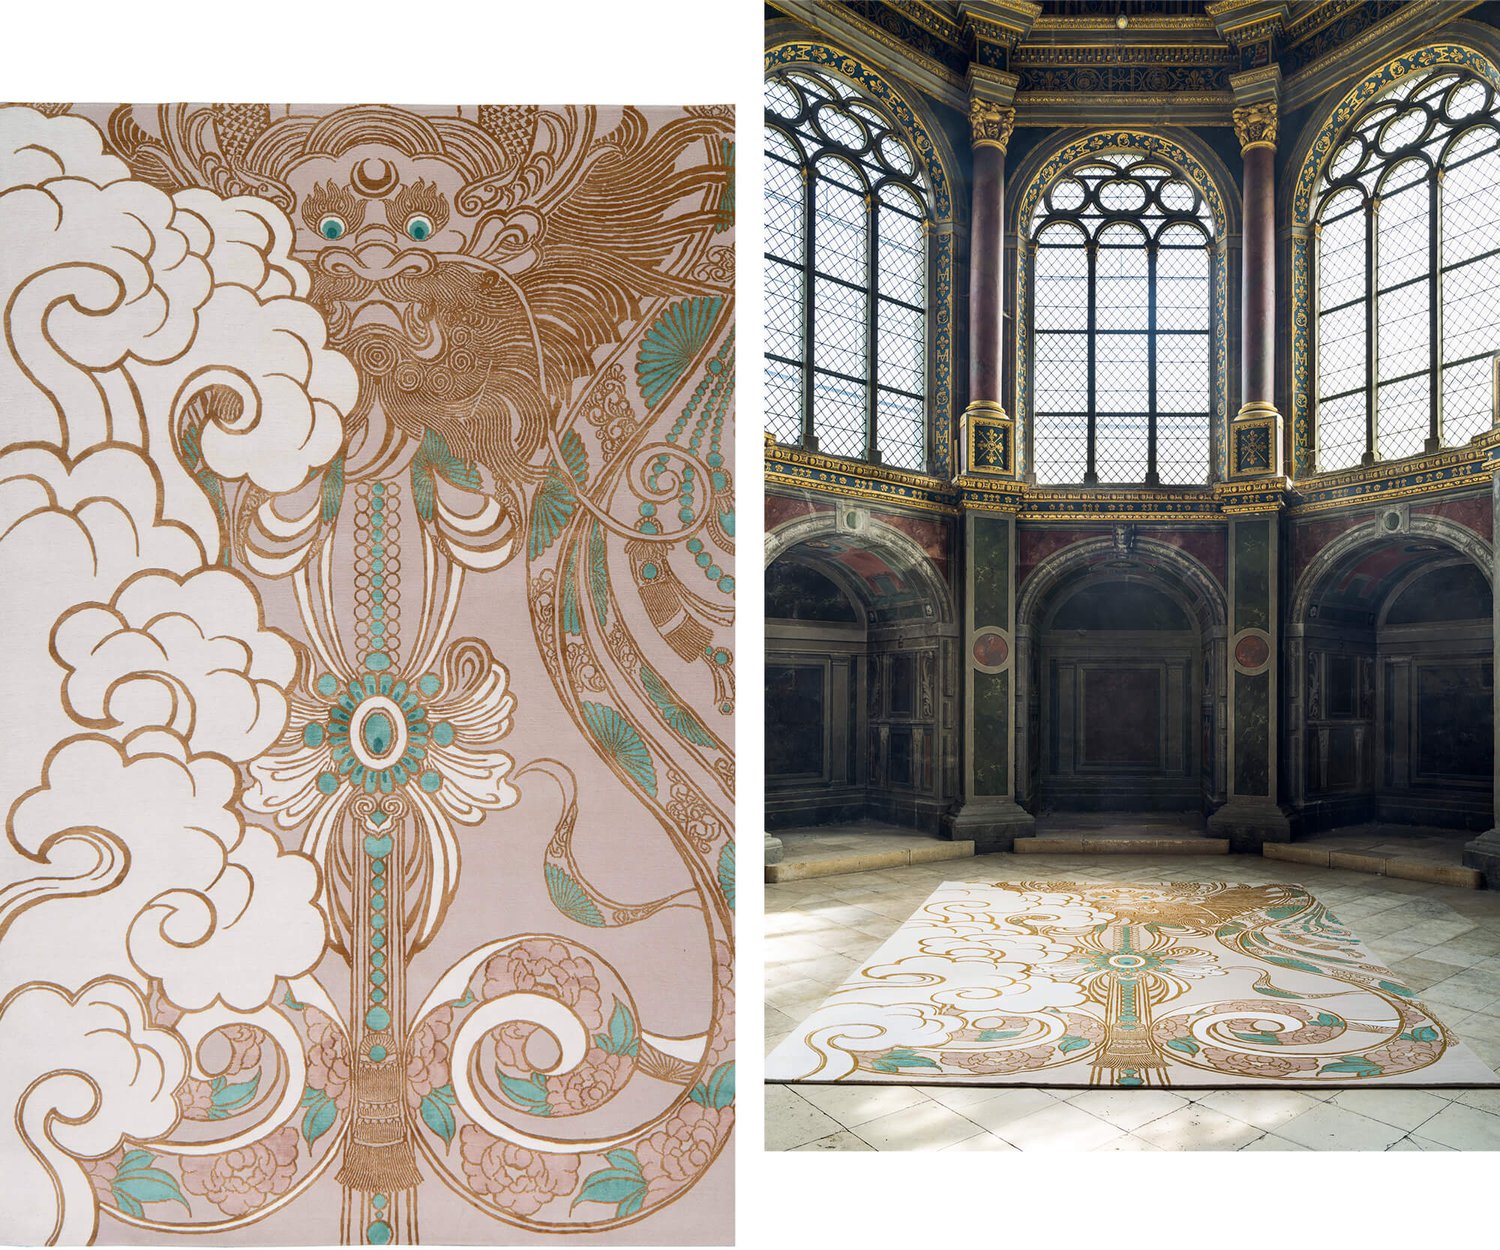 Two images: On left a closeup of the whimsical graphic of a dragon and on right the rug with that pattern in a high ceilinged hall with large arched windows.